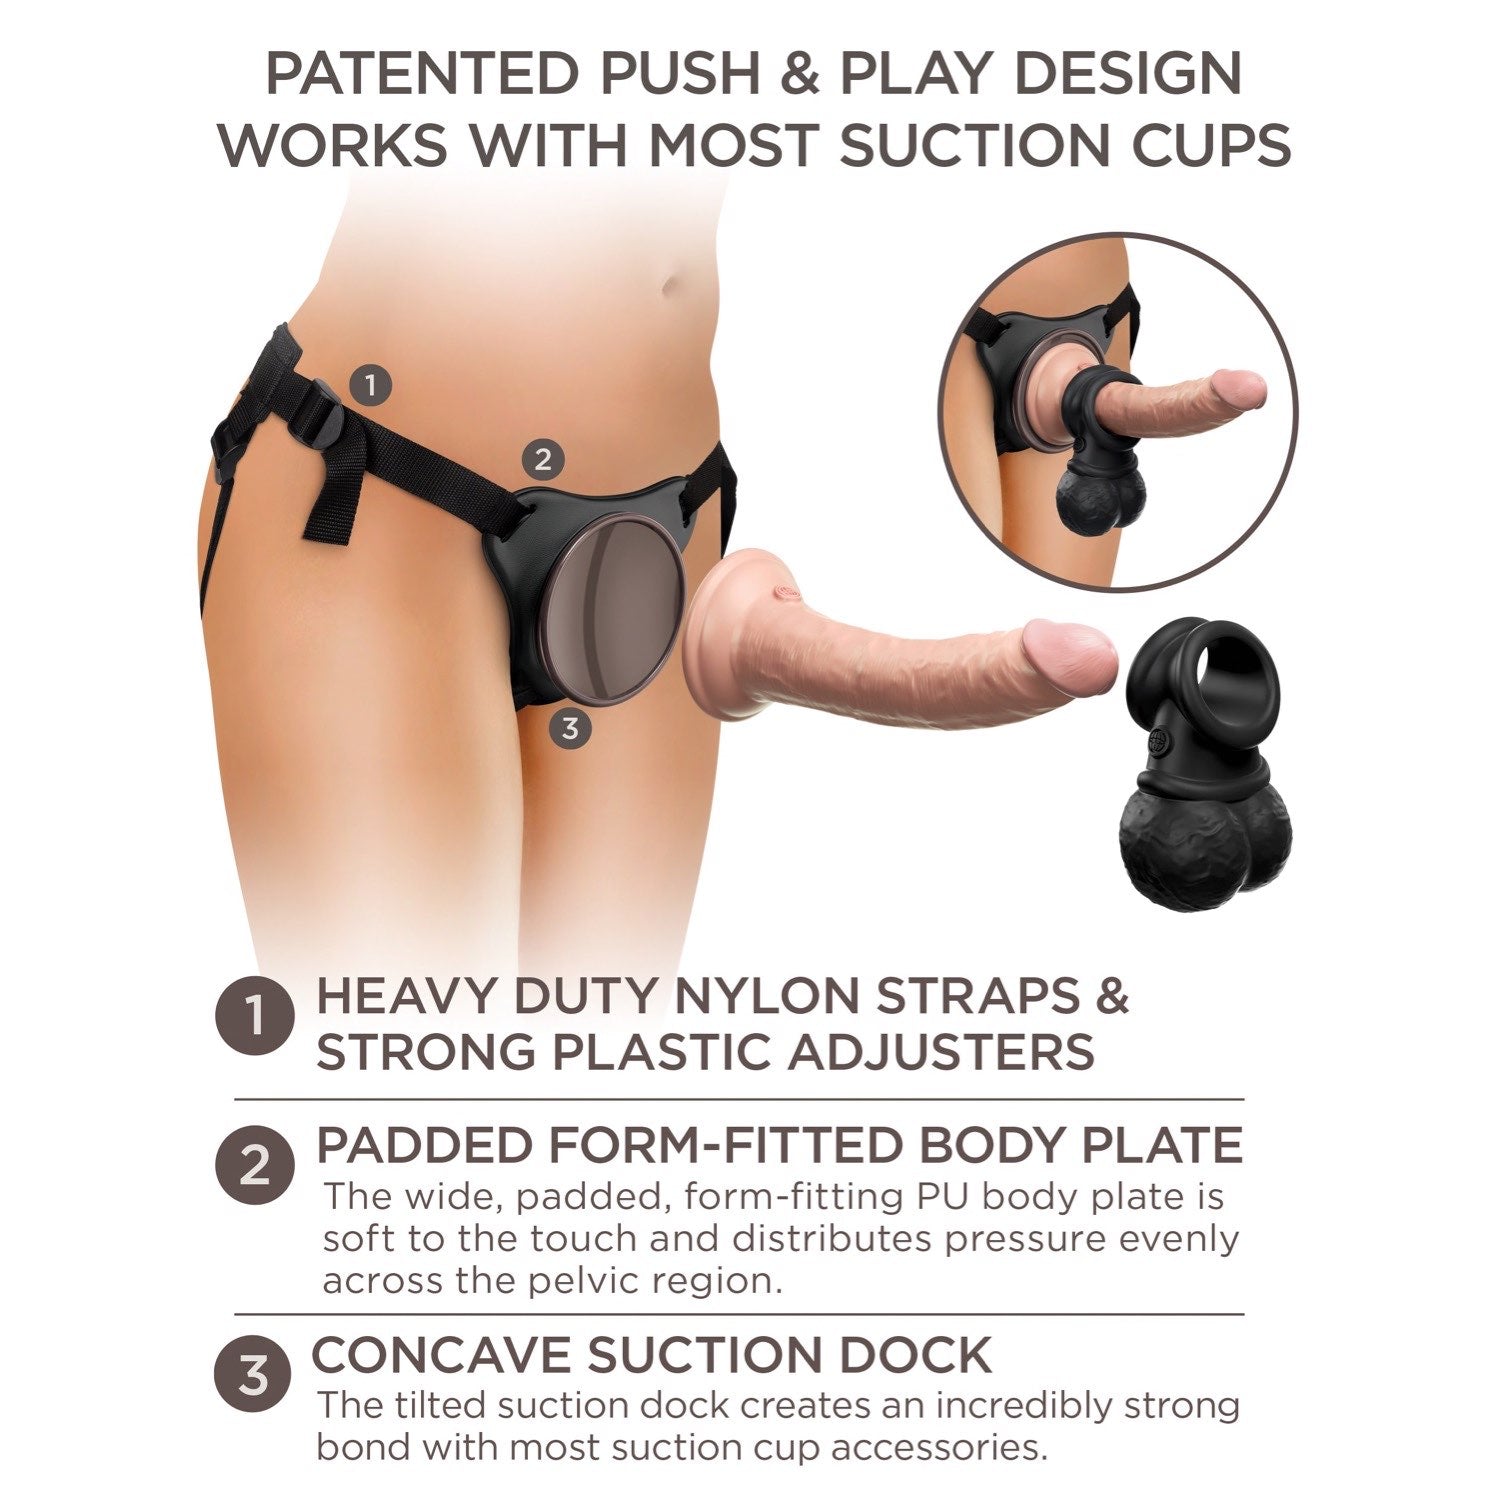 King Cock Elite Ultimate Vibrating Silicone Body Dock Kit - Body Dock Strap-On Harness with 17.8 cm Vibrating Dong &amp; Vibrating Balls by Pipedream